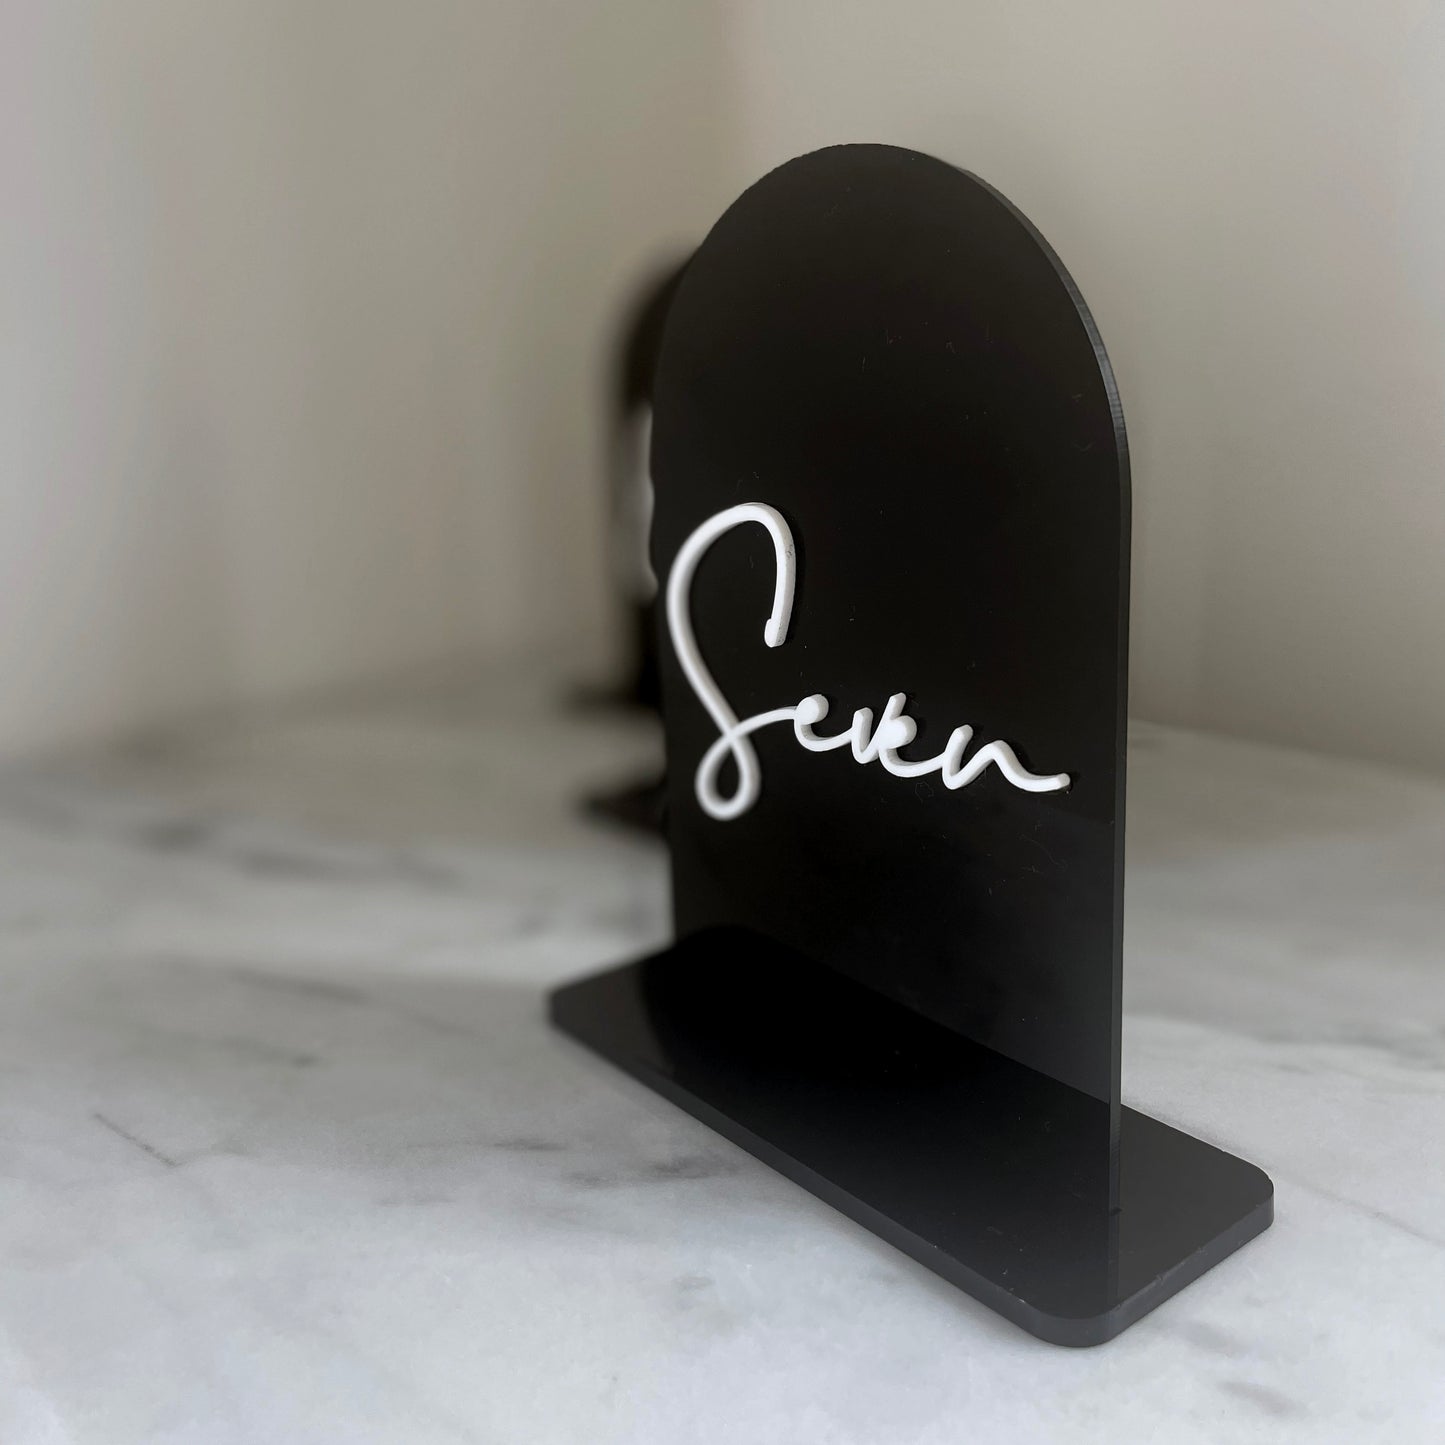 CURVED ACRYLIC BLACK & WHITE TABLE NUMBERS